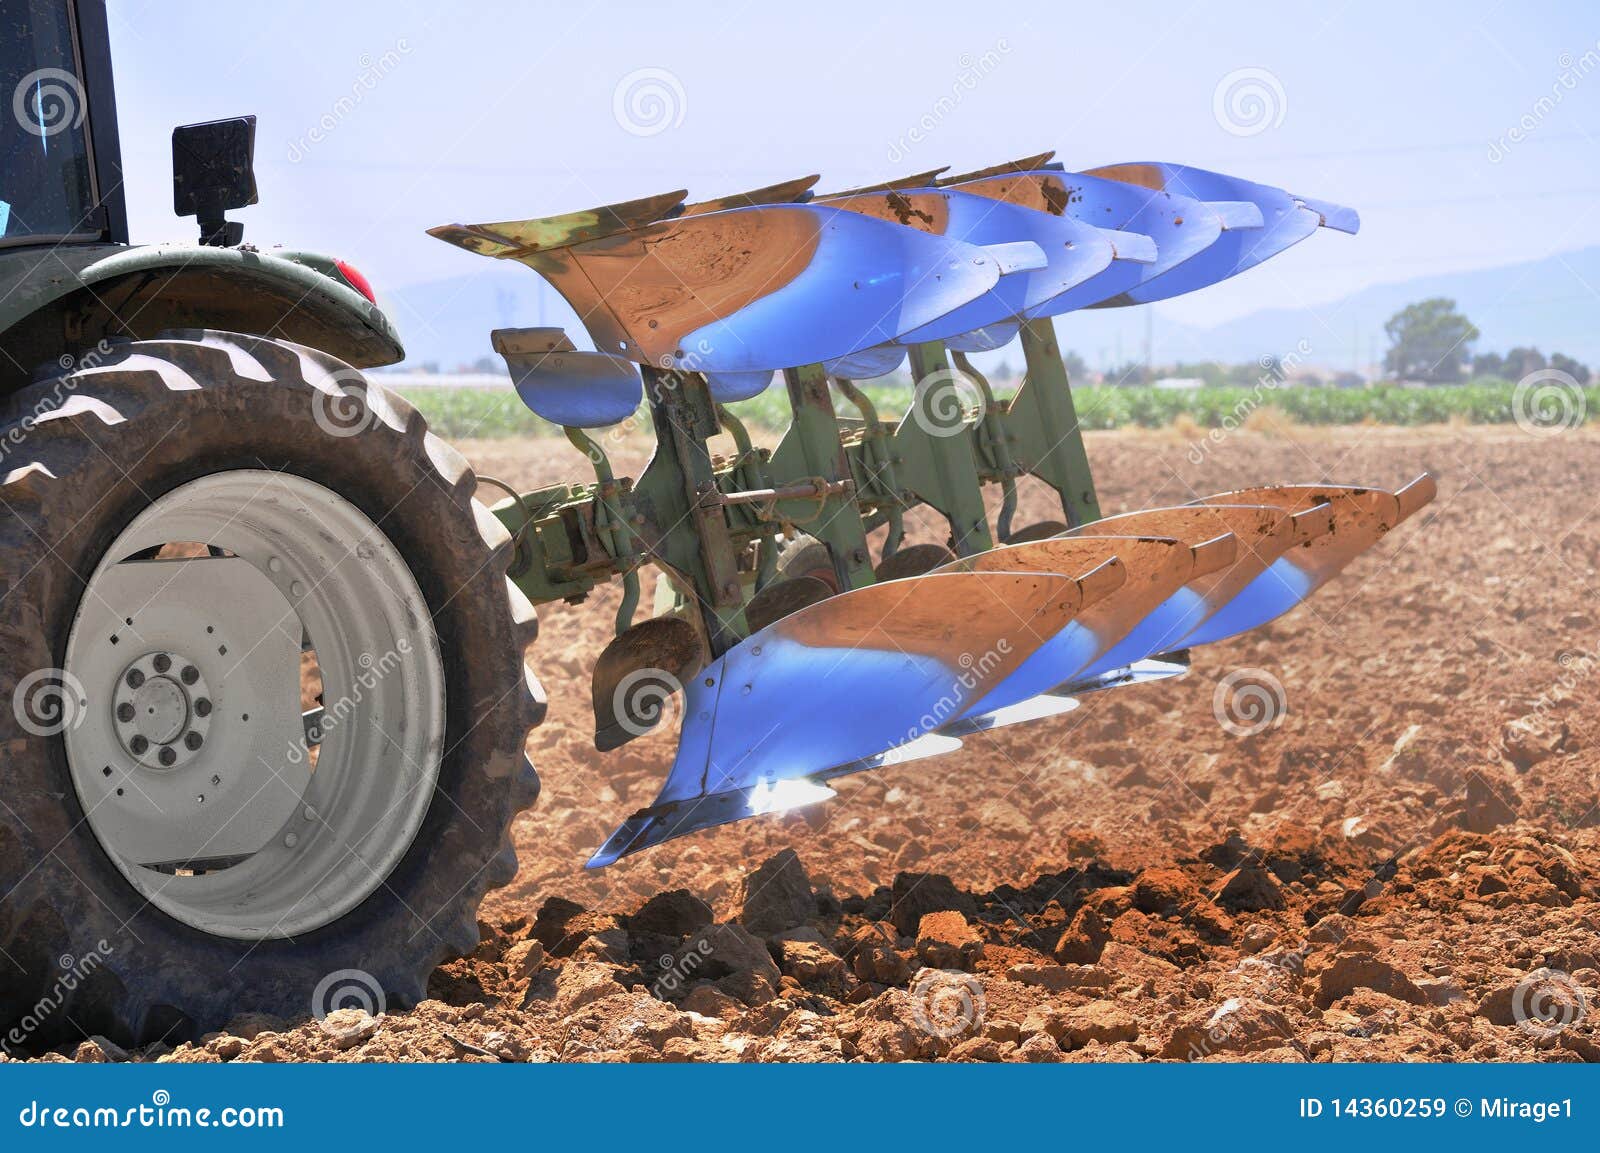 reversible plough on a tractor